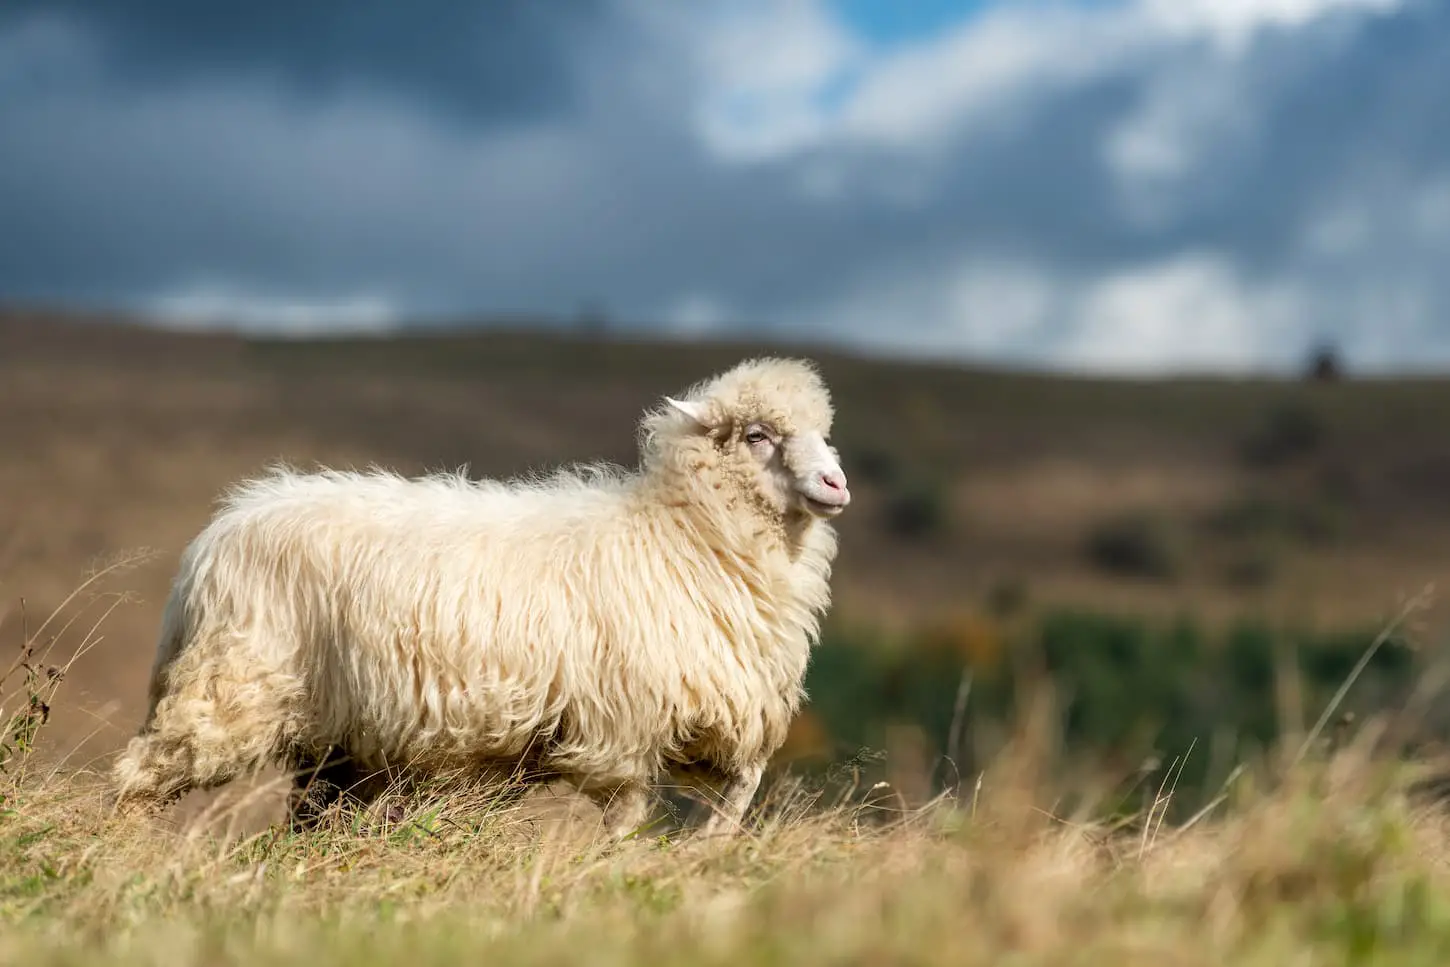 An image of a sheep wandering in the pasture.